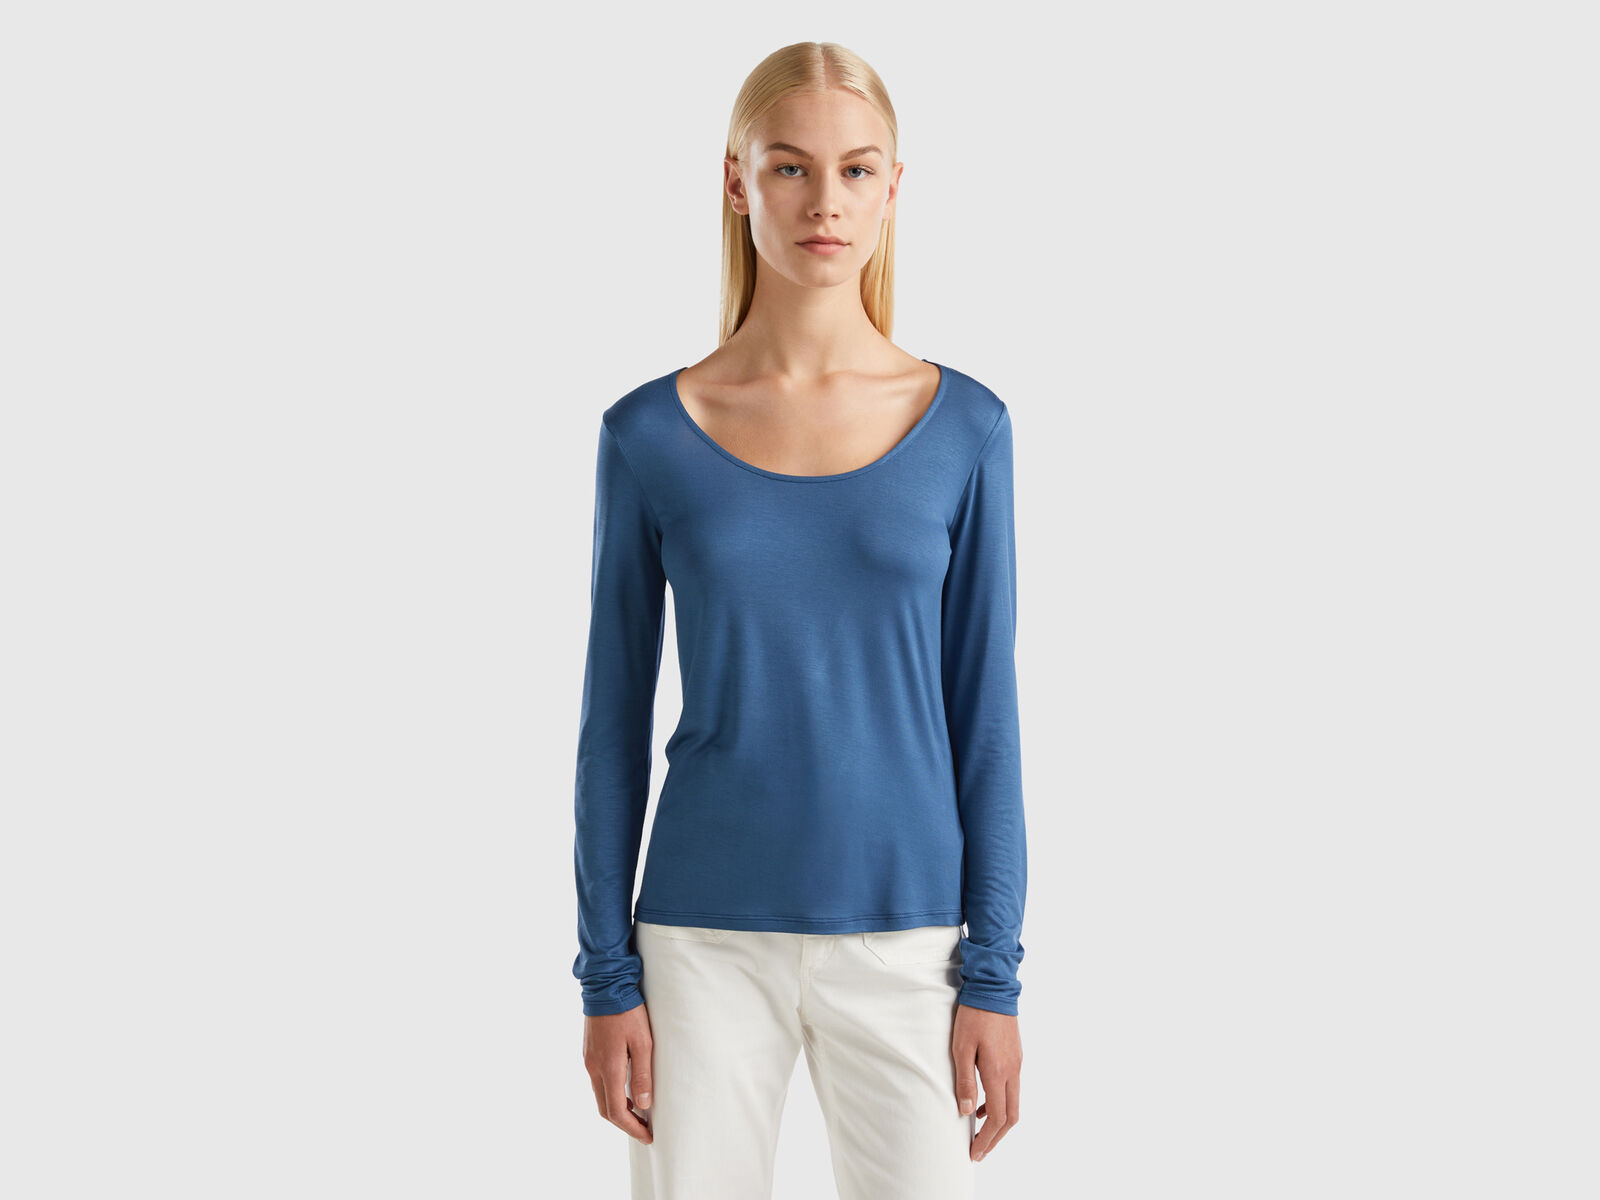 viscose Air | Blue Force in sustainable - Benetton T-shirt stretch